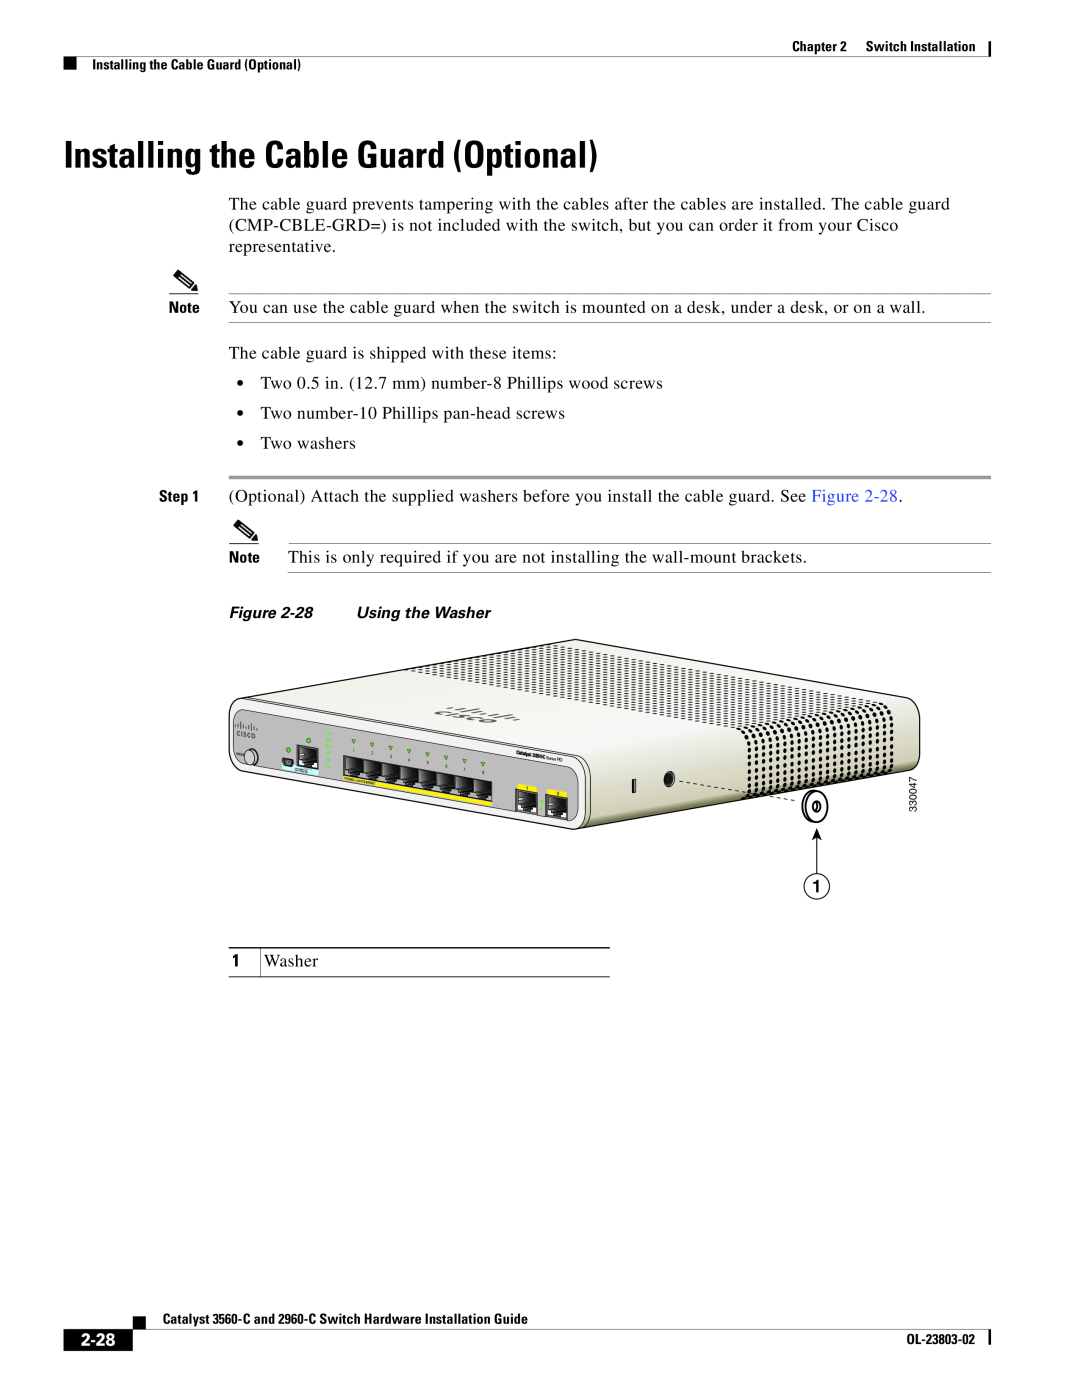 Cisco Systems N55M4Q manual Installing the Cable Guard Optional, 2-28 